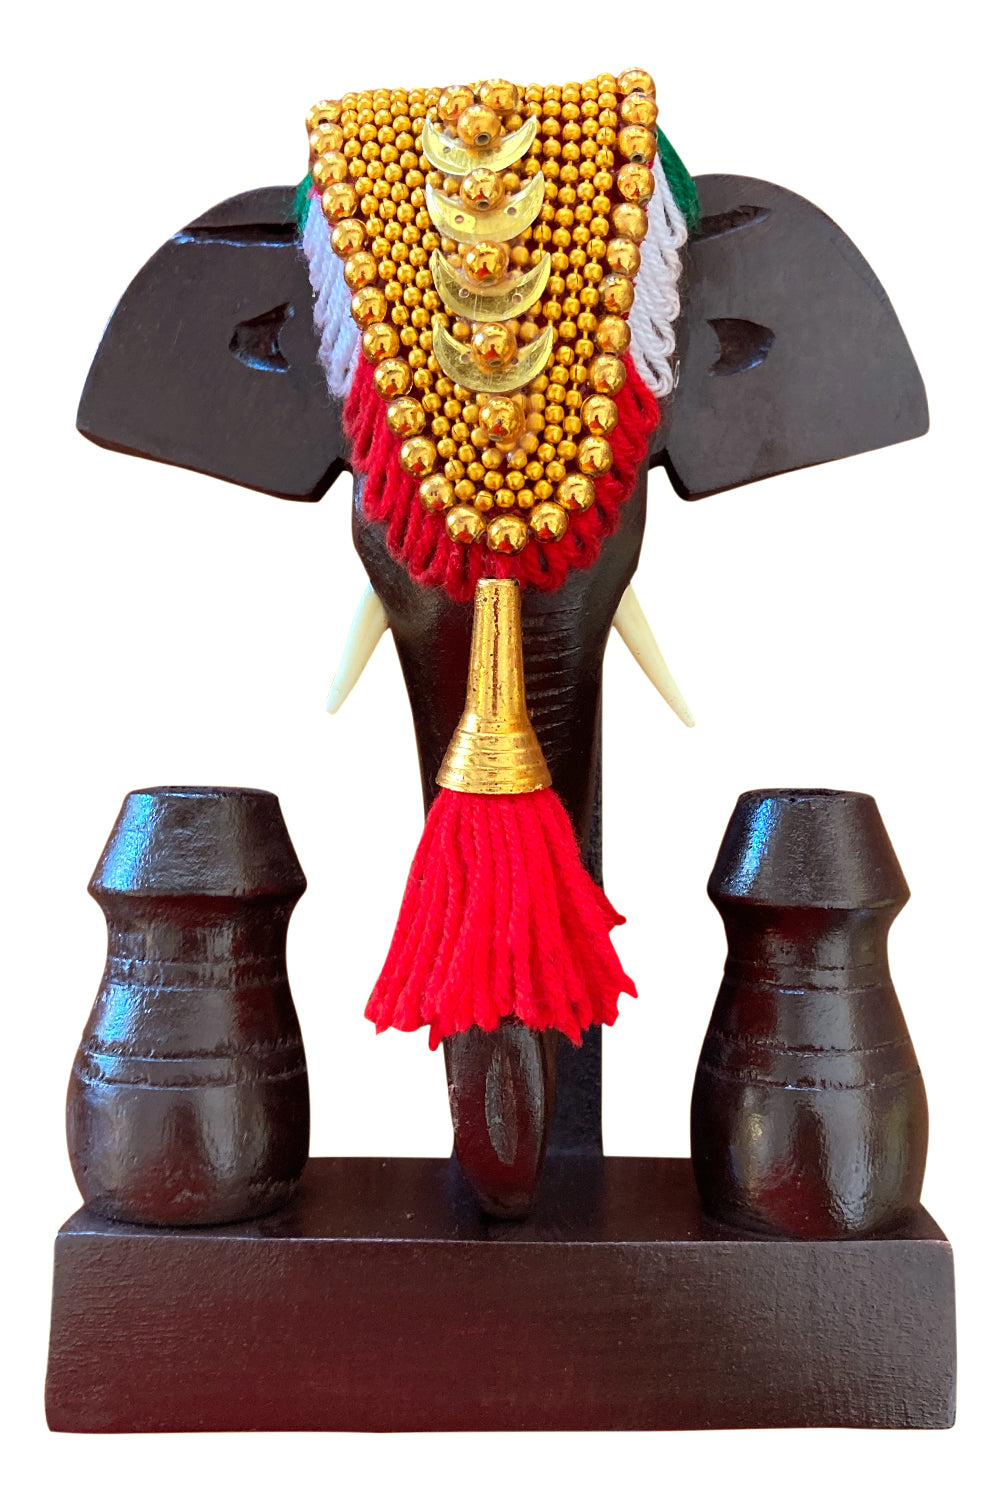 Southloom Handmade Temple Elephant Head with Pen Holder Handicraft 8 inches (Carved from Mahogany Wood)